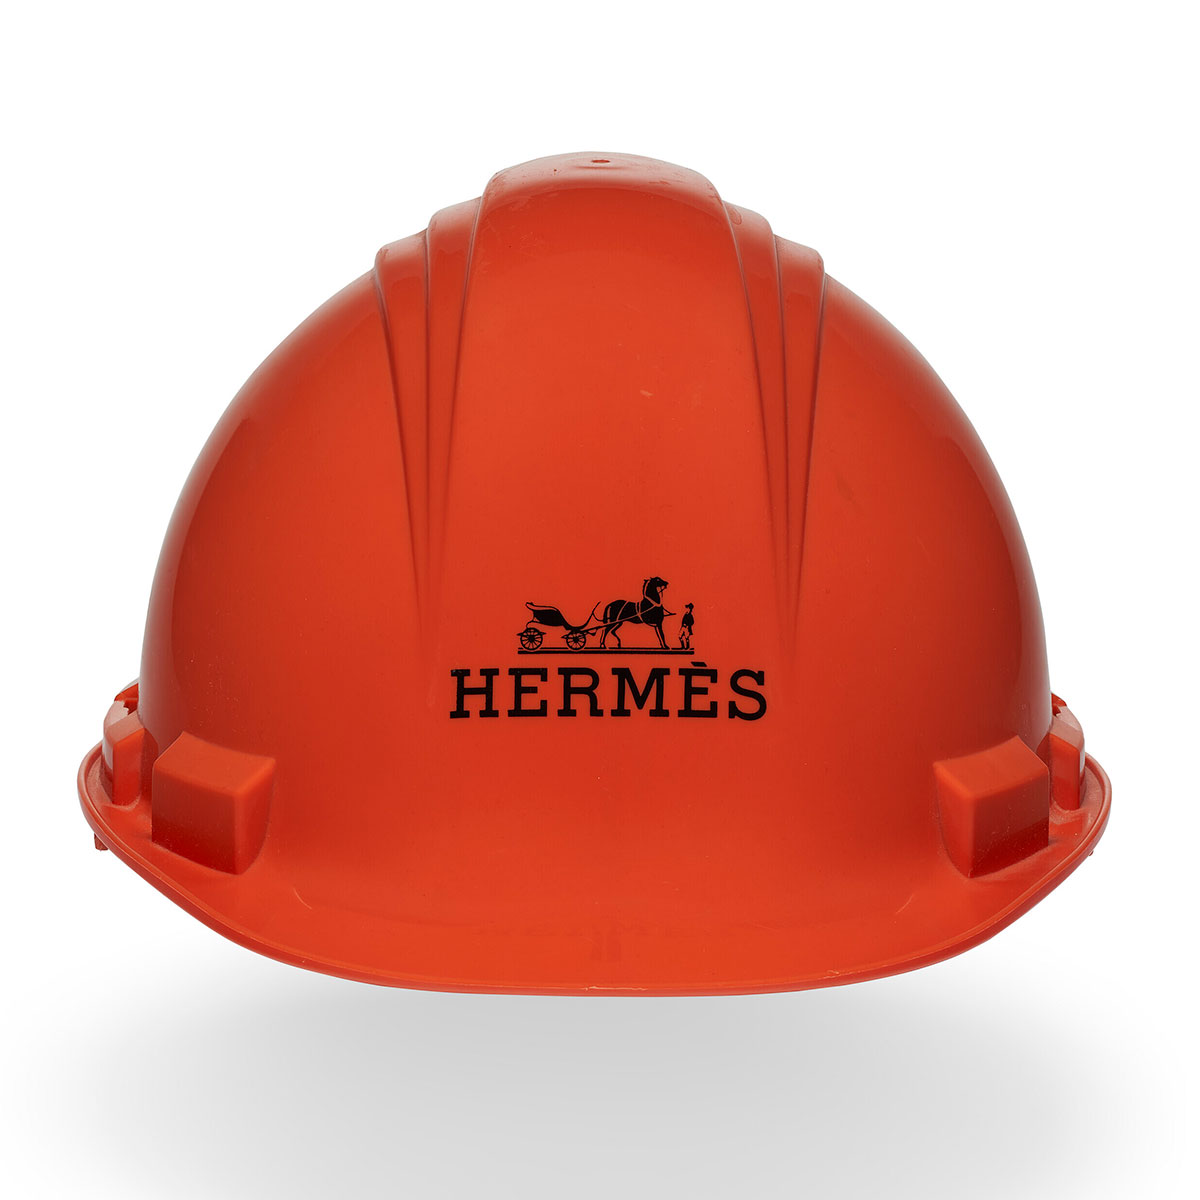 2023 NYR 22070 0091 000(a construction hat hermes 2008113503)